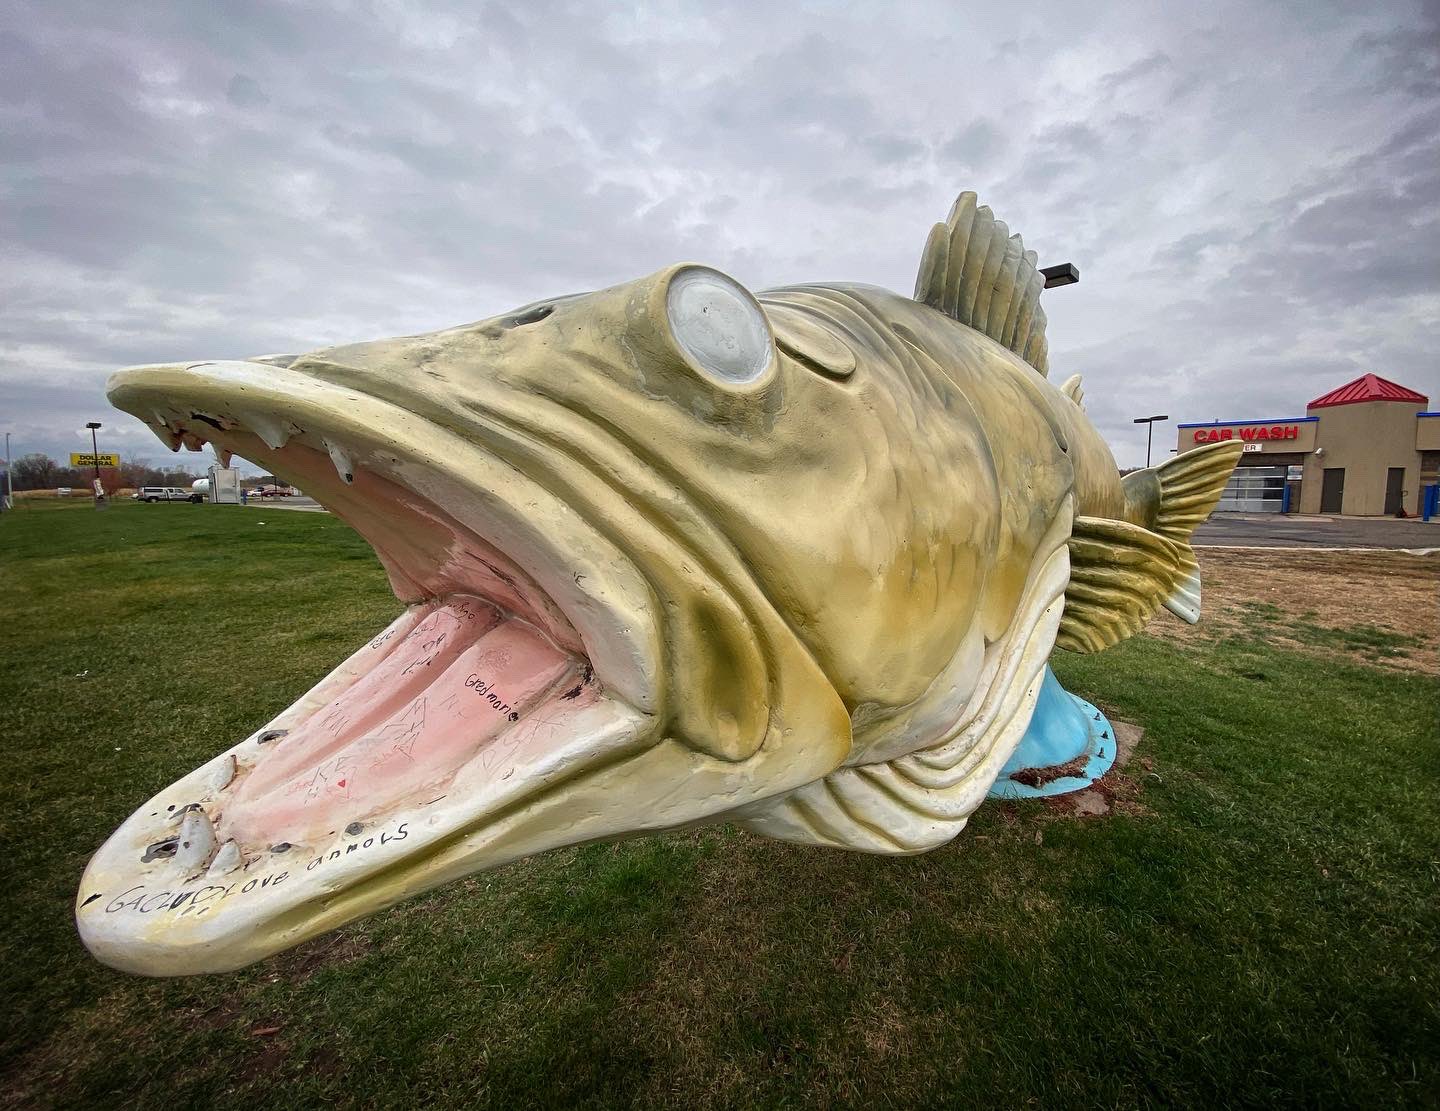 Greg Swan on X: Today's surprise road trip was to the World's Largest  Walleye outside Rush City. The walleye is the state fish of Minnesota, and  they are super tasty. This one